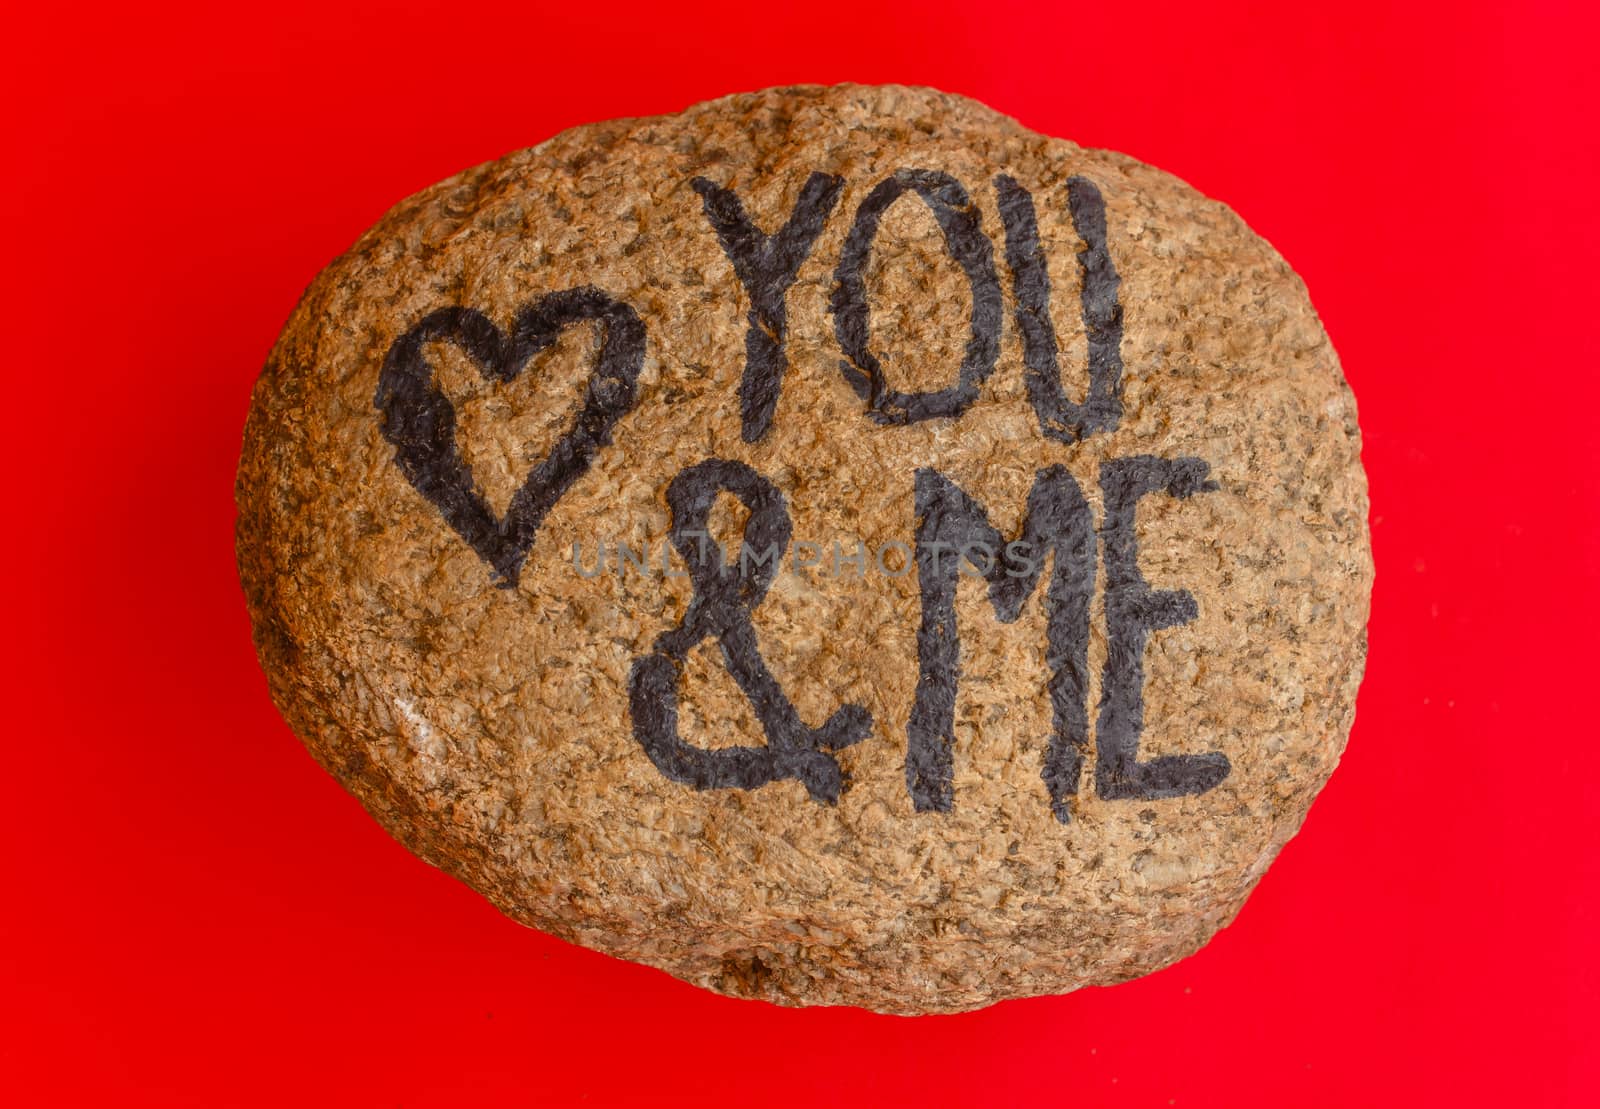 the english  writing you and me with a heart drawn on a stone by grancanaria